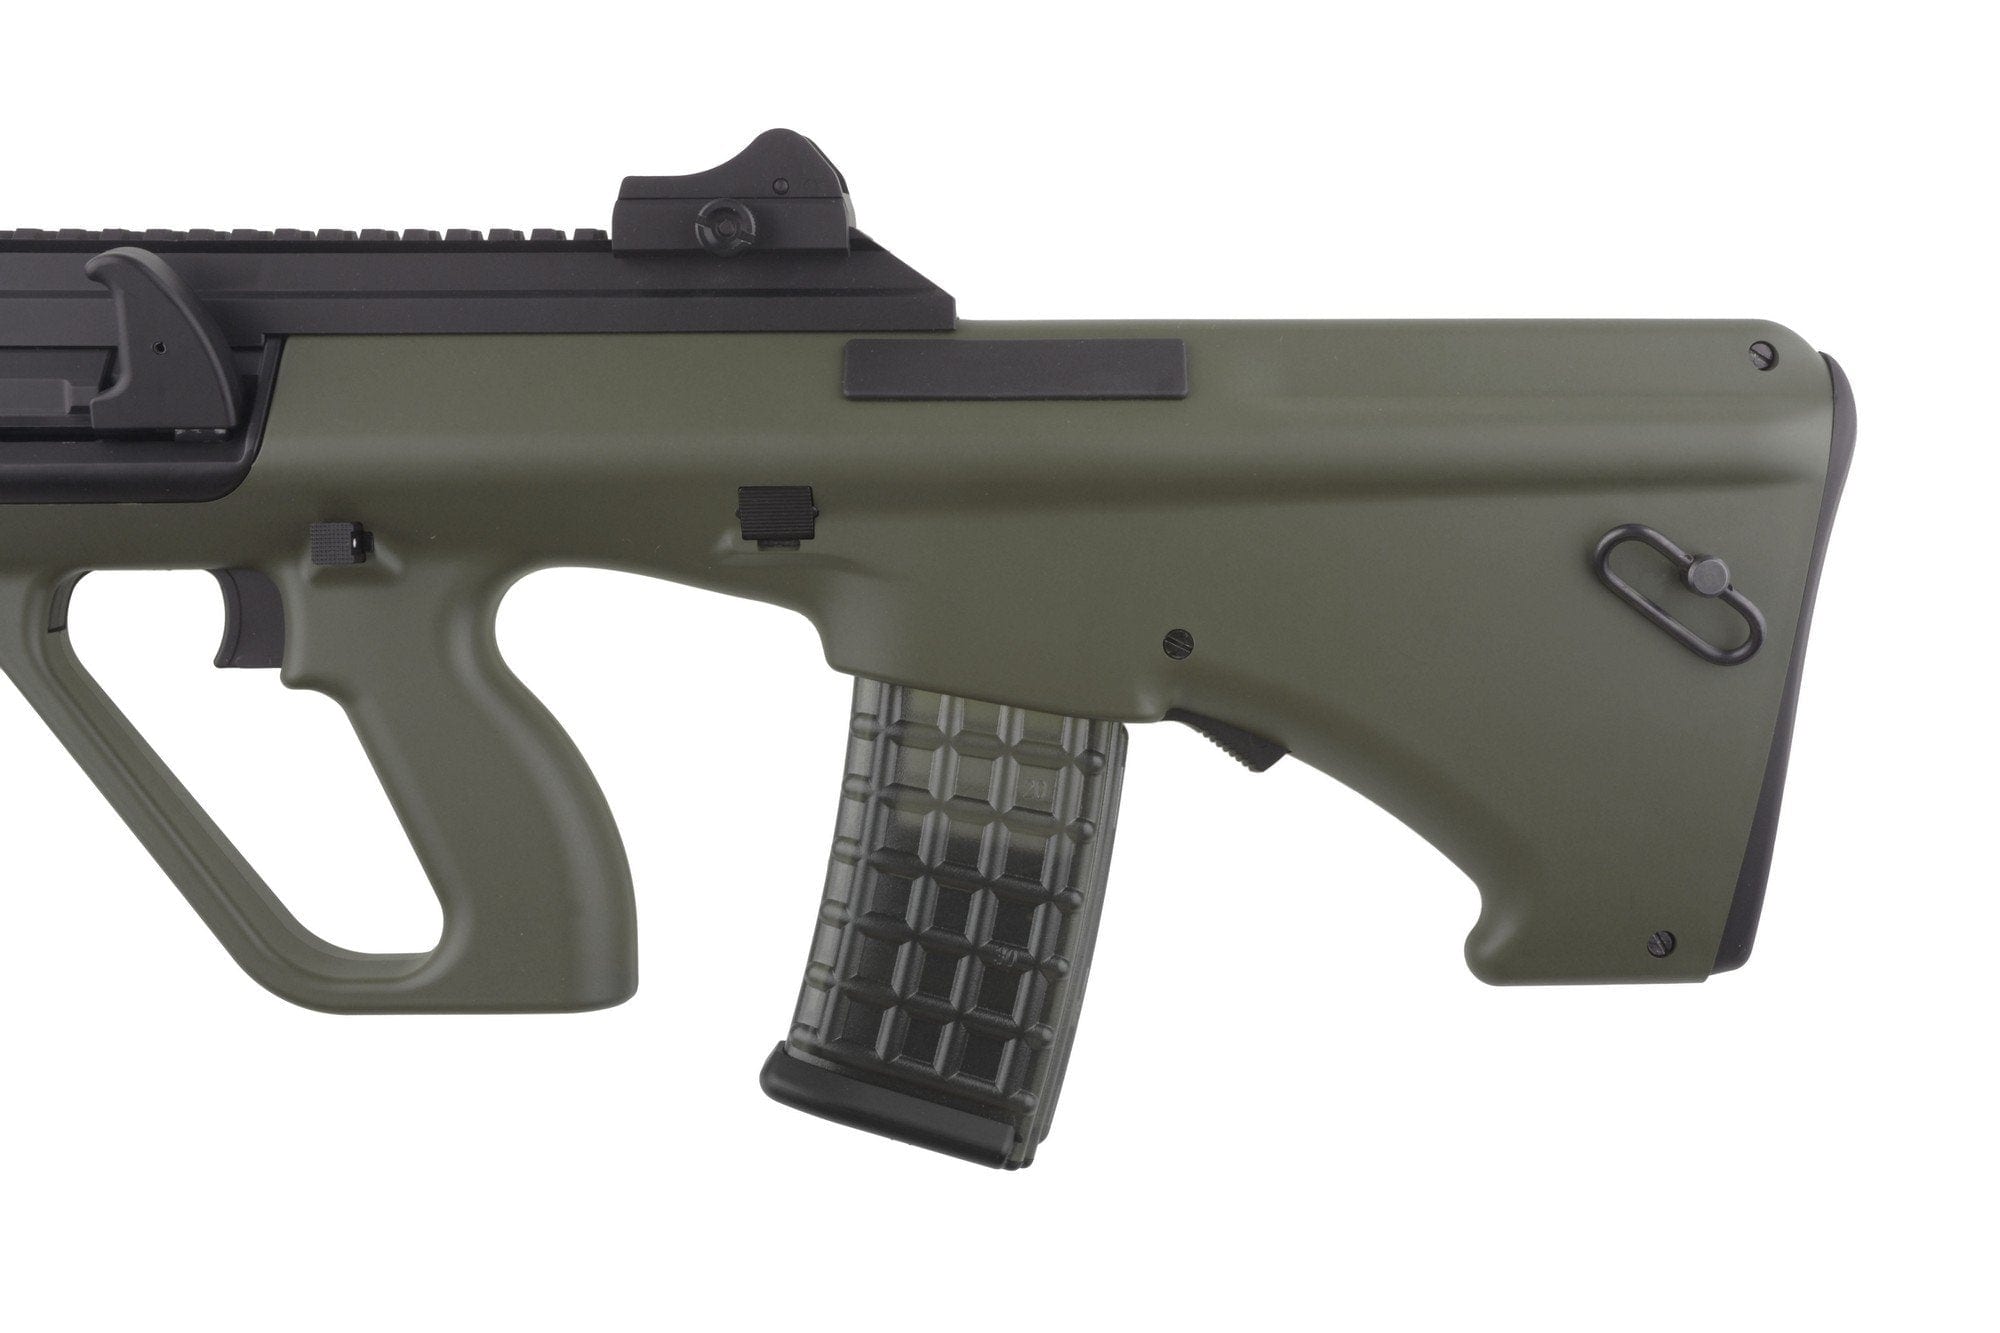 AUG SW-020T Compact - Vert olive